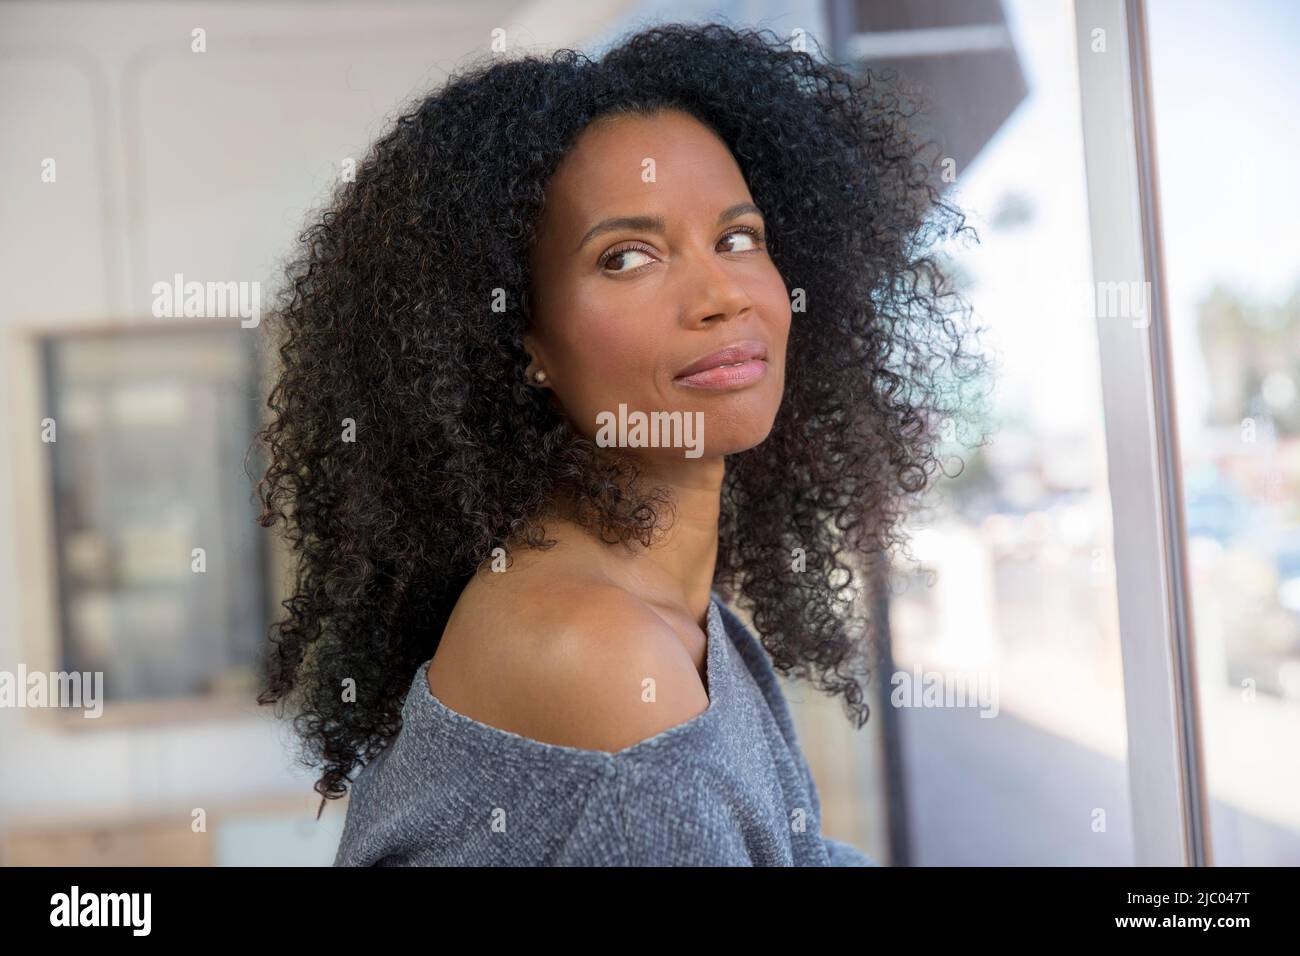 Middle-aged woman looks back over her shoulder. Stock Photo